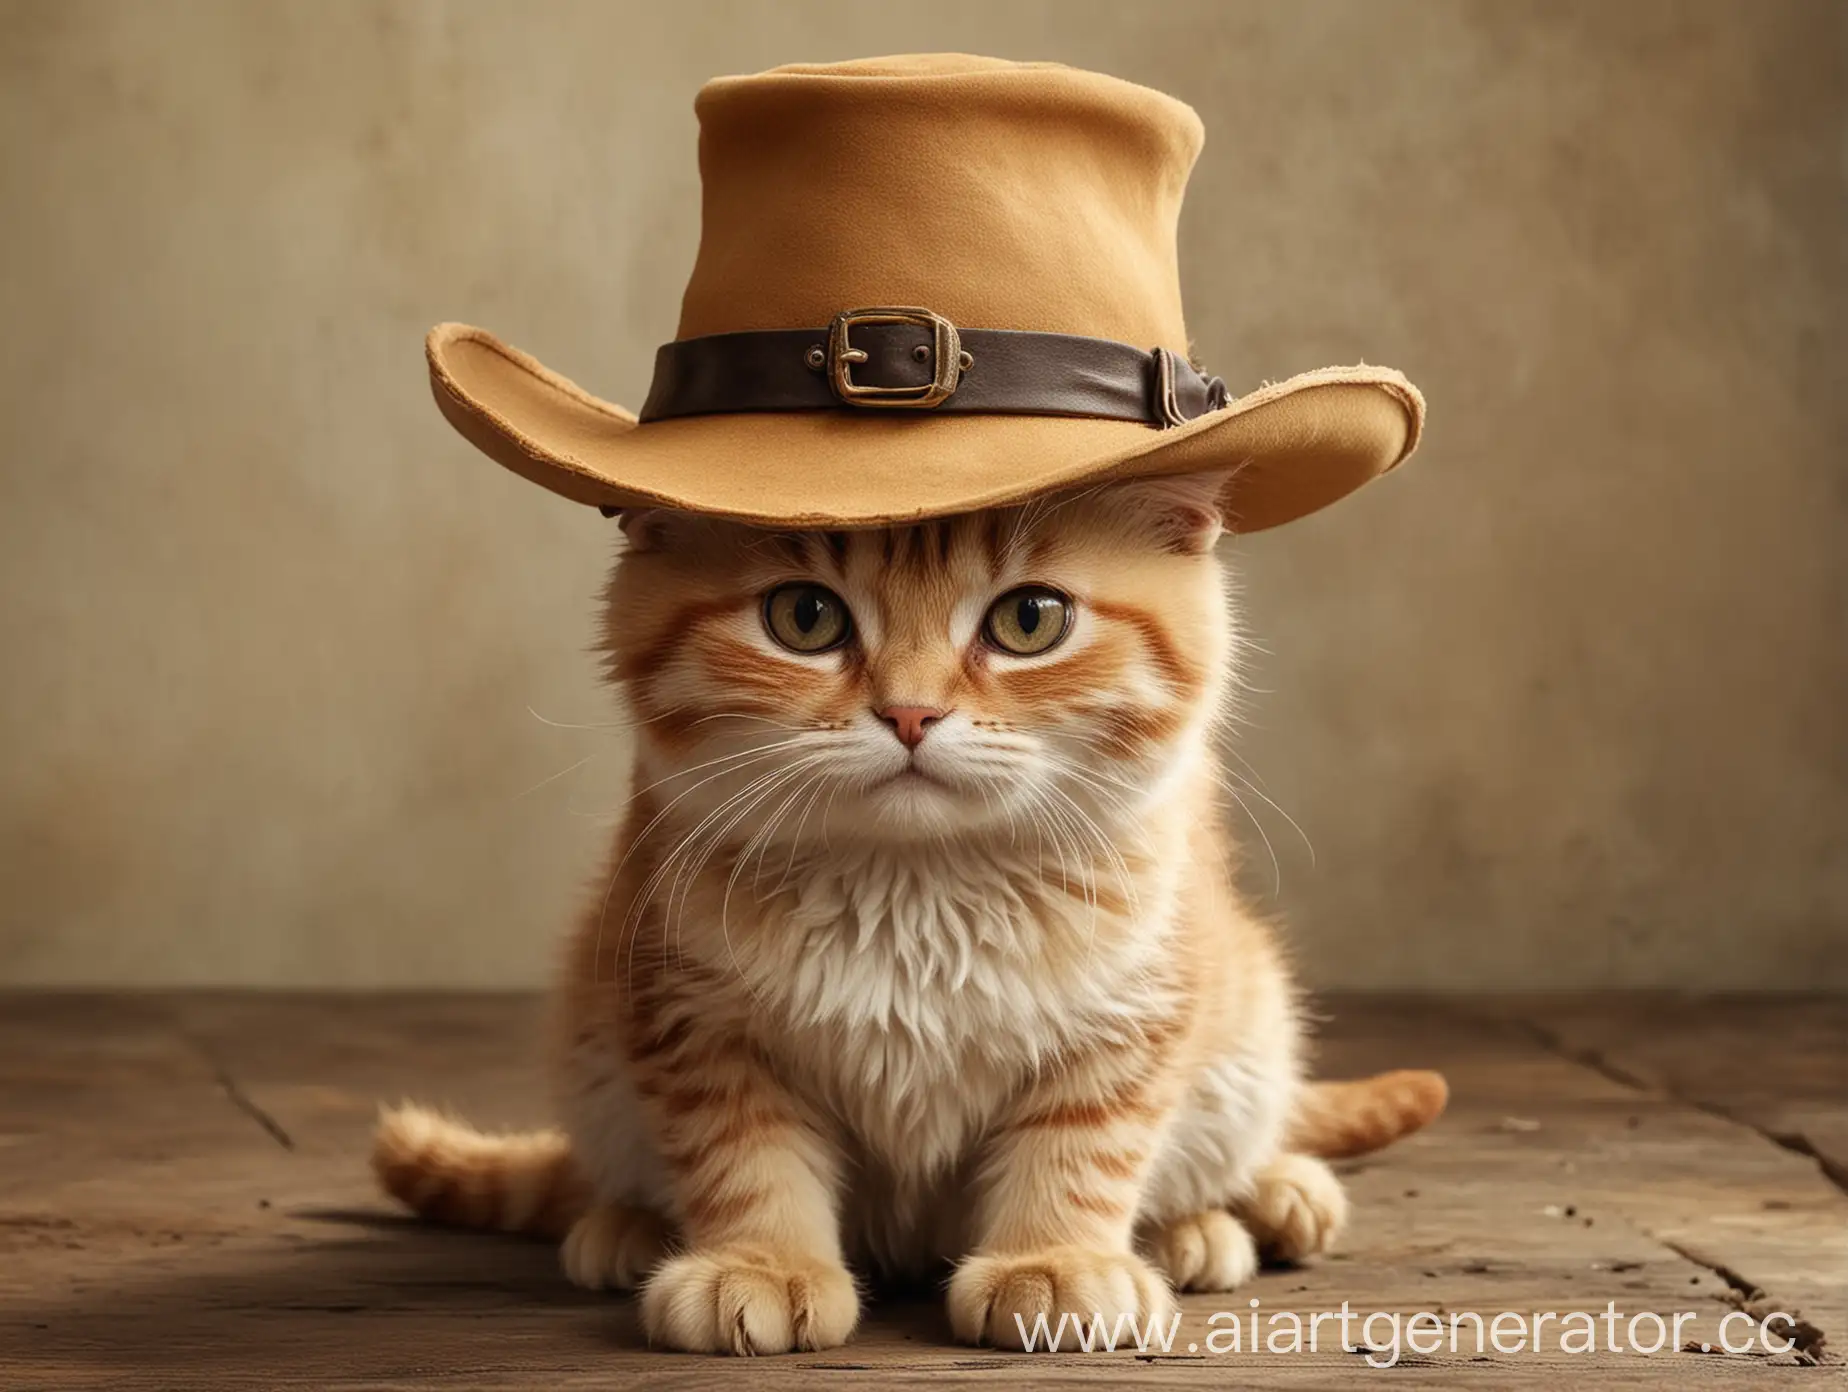 The plaintive look of a puss in boots with a hat in his paws